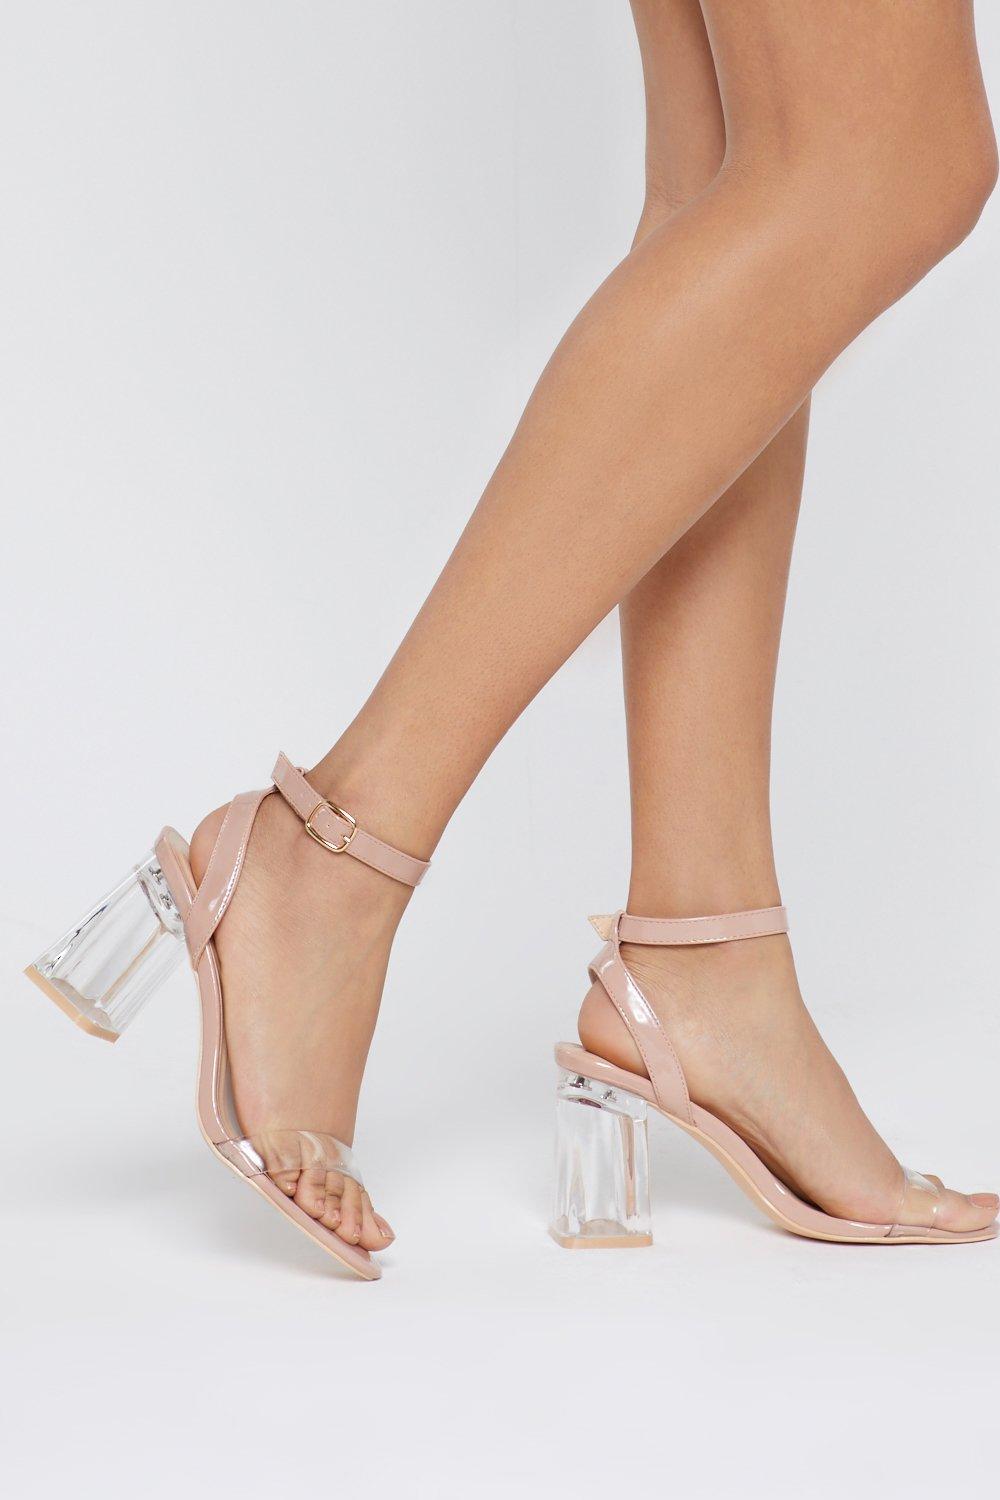 clear nude shoes